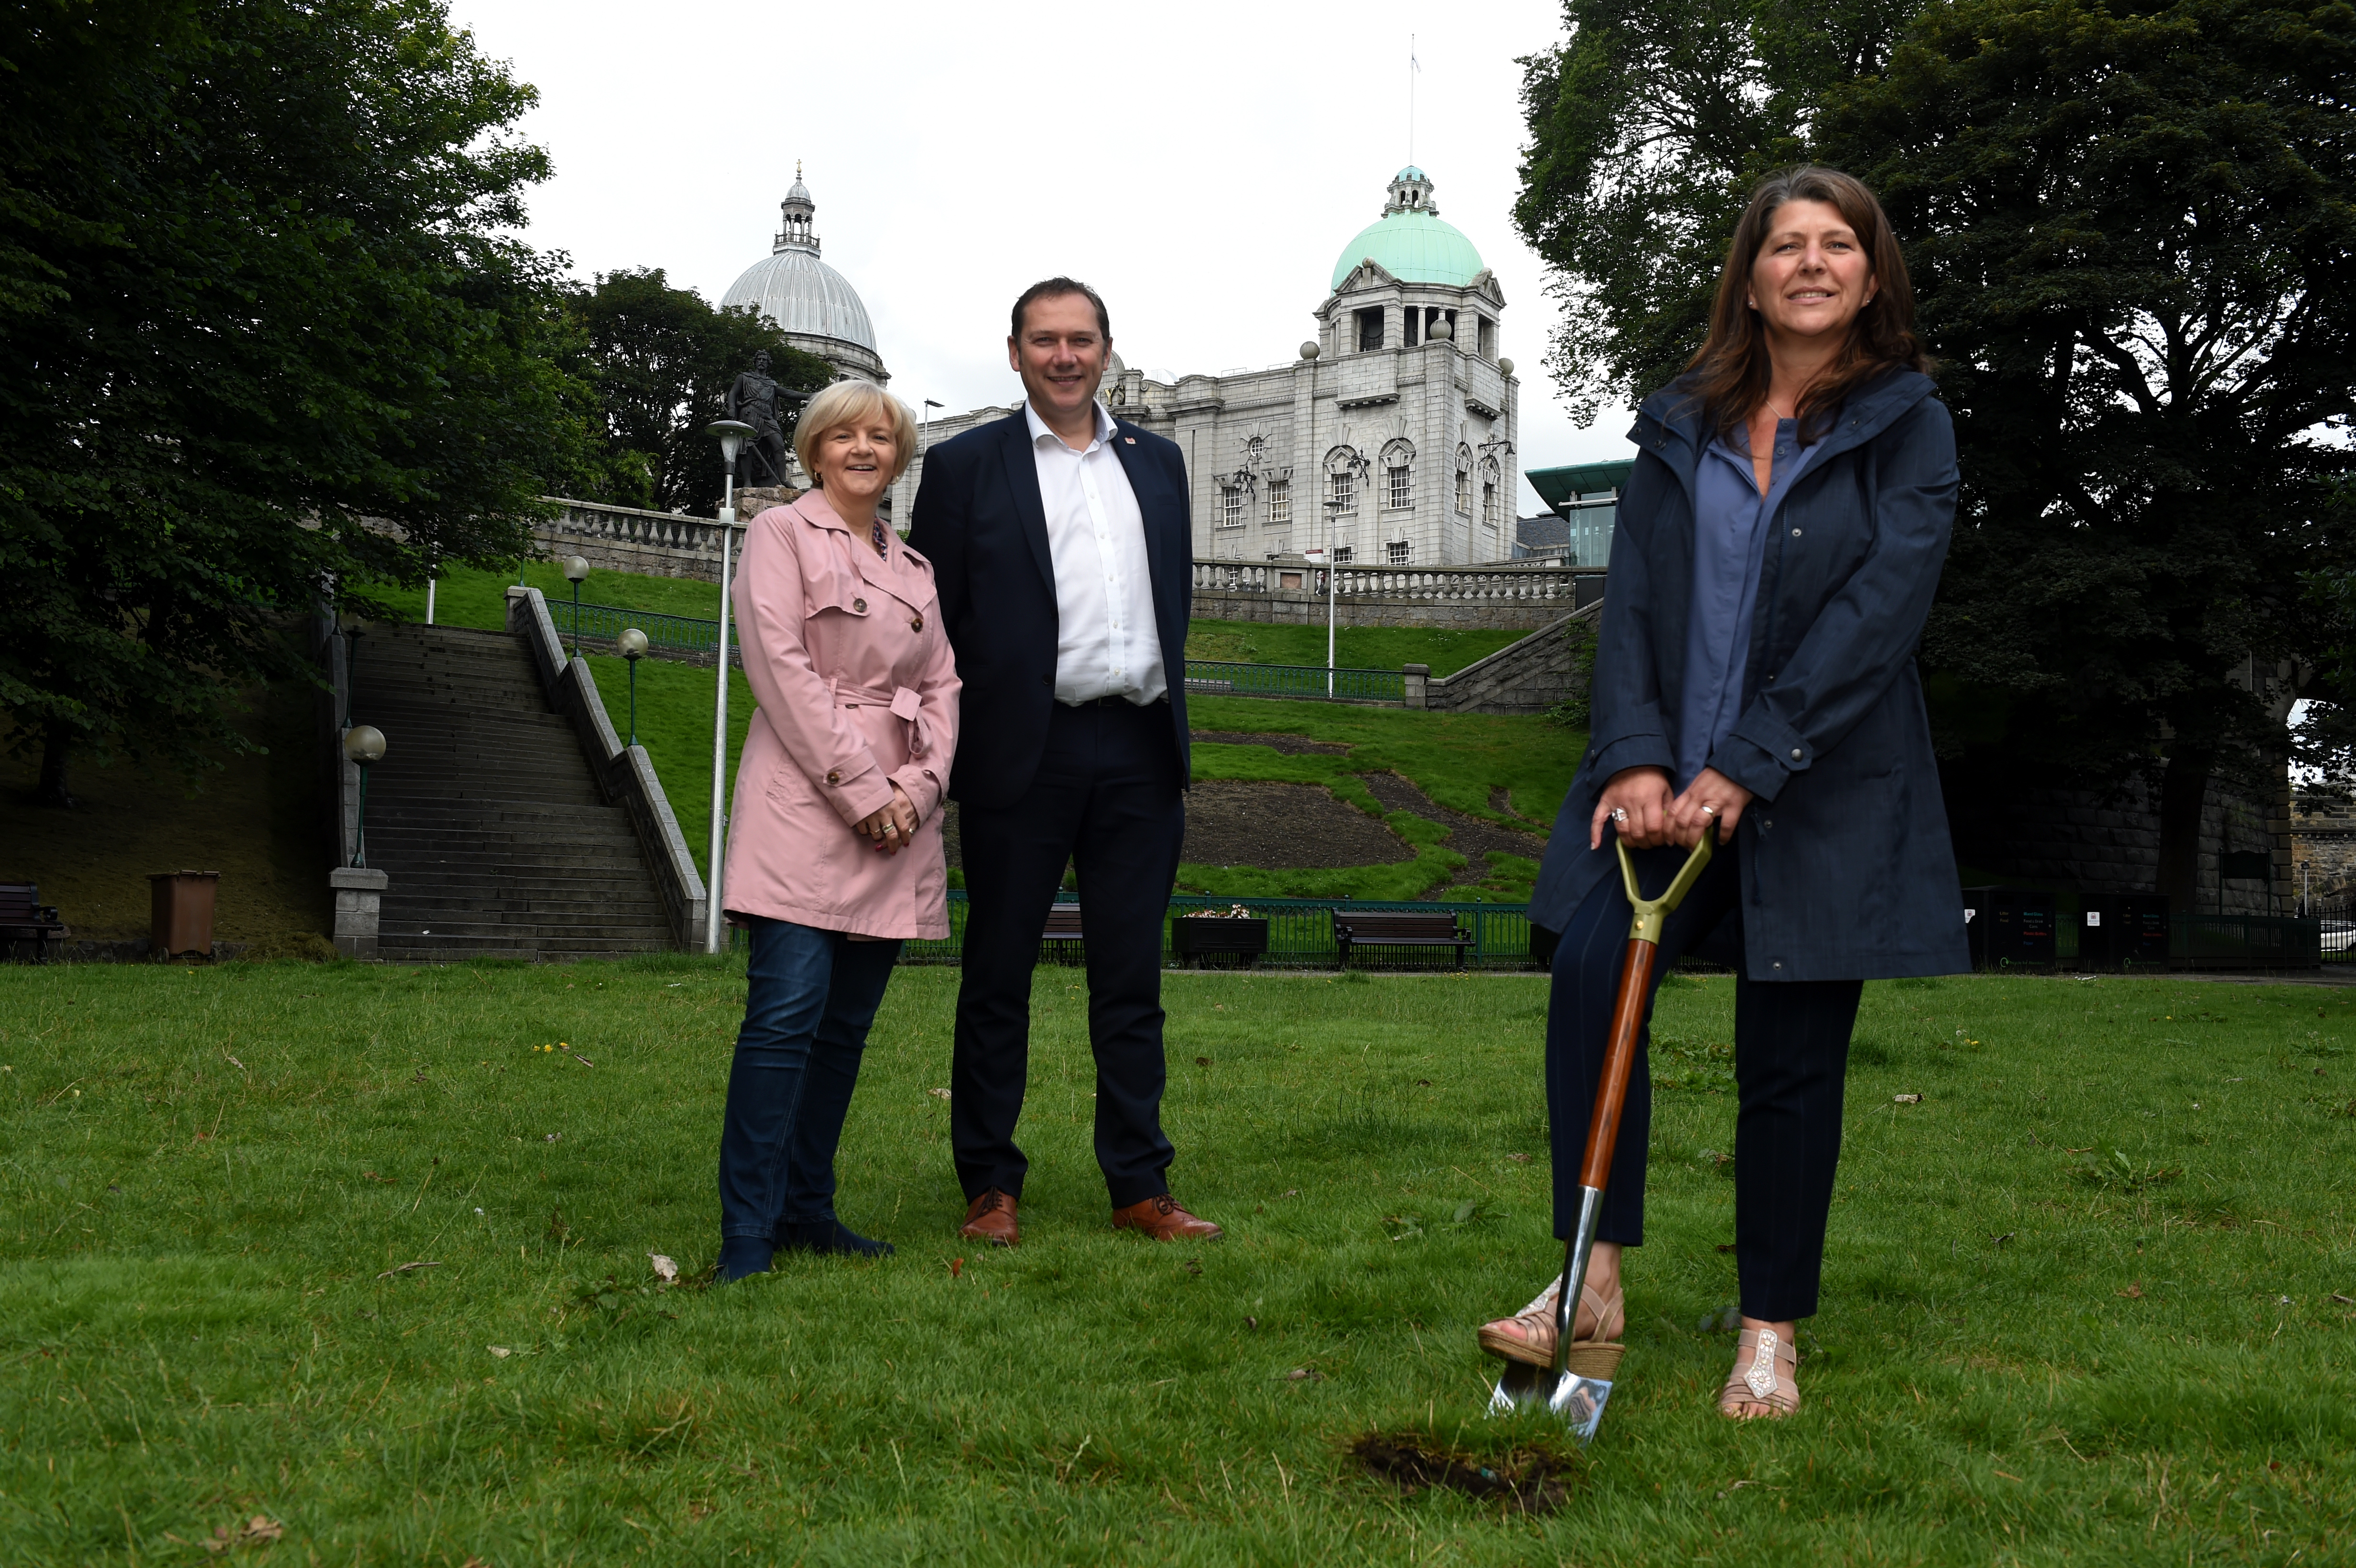 The first turf is cut at Union Terrace Gardens in advance of work beginning on site to transform the city centre park.